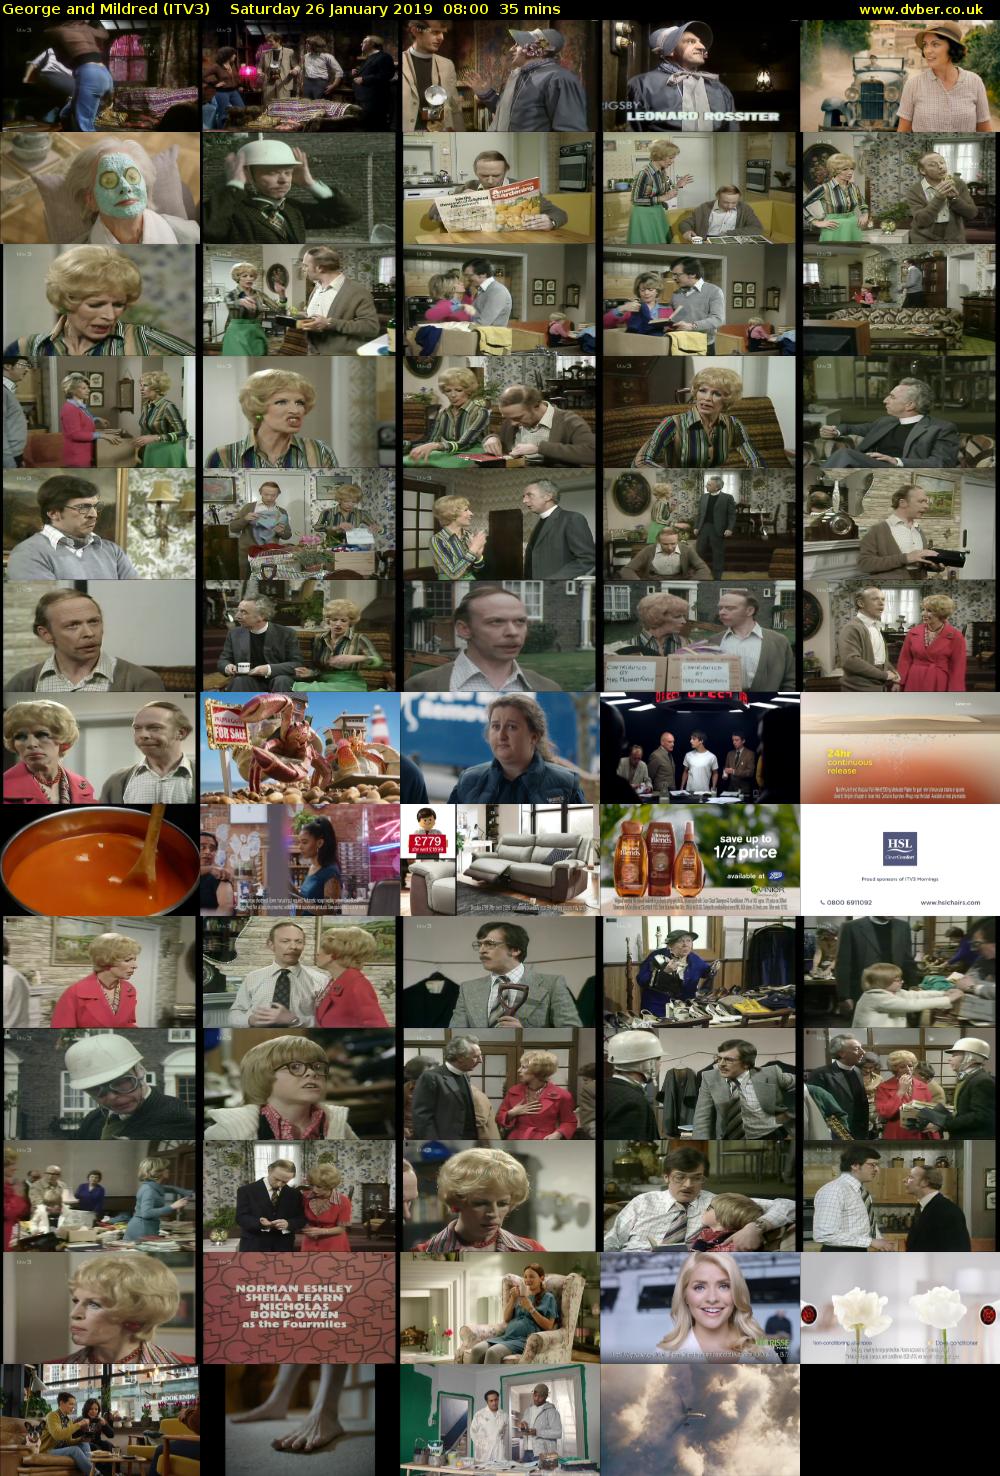 George and Mildred (ITV3) Saturday 26 January 2019 08:00 - 08:35